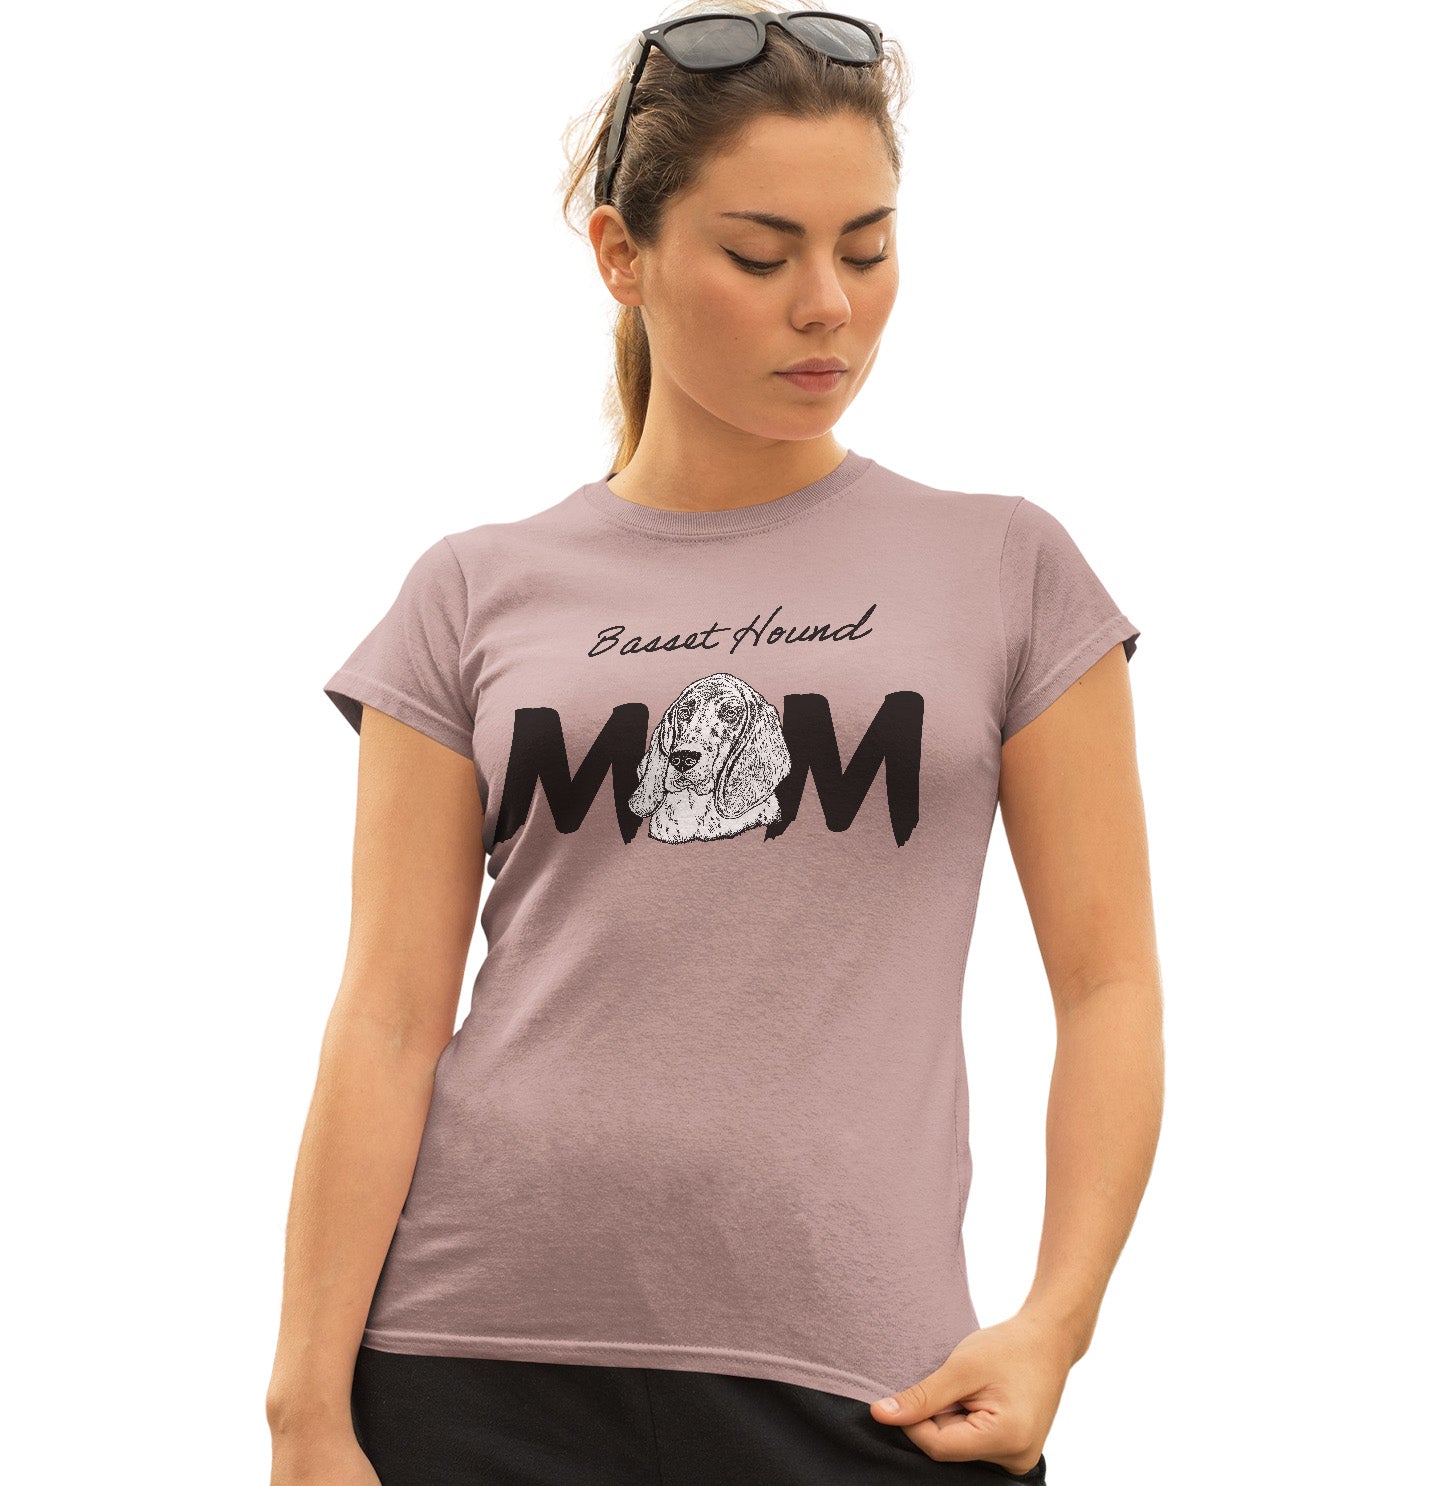 Basset Hound Breed Mom - Women's Fitted T-Shirt